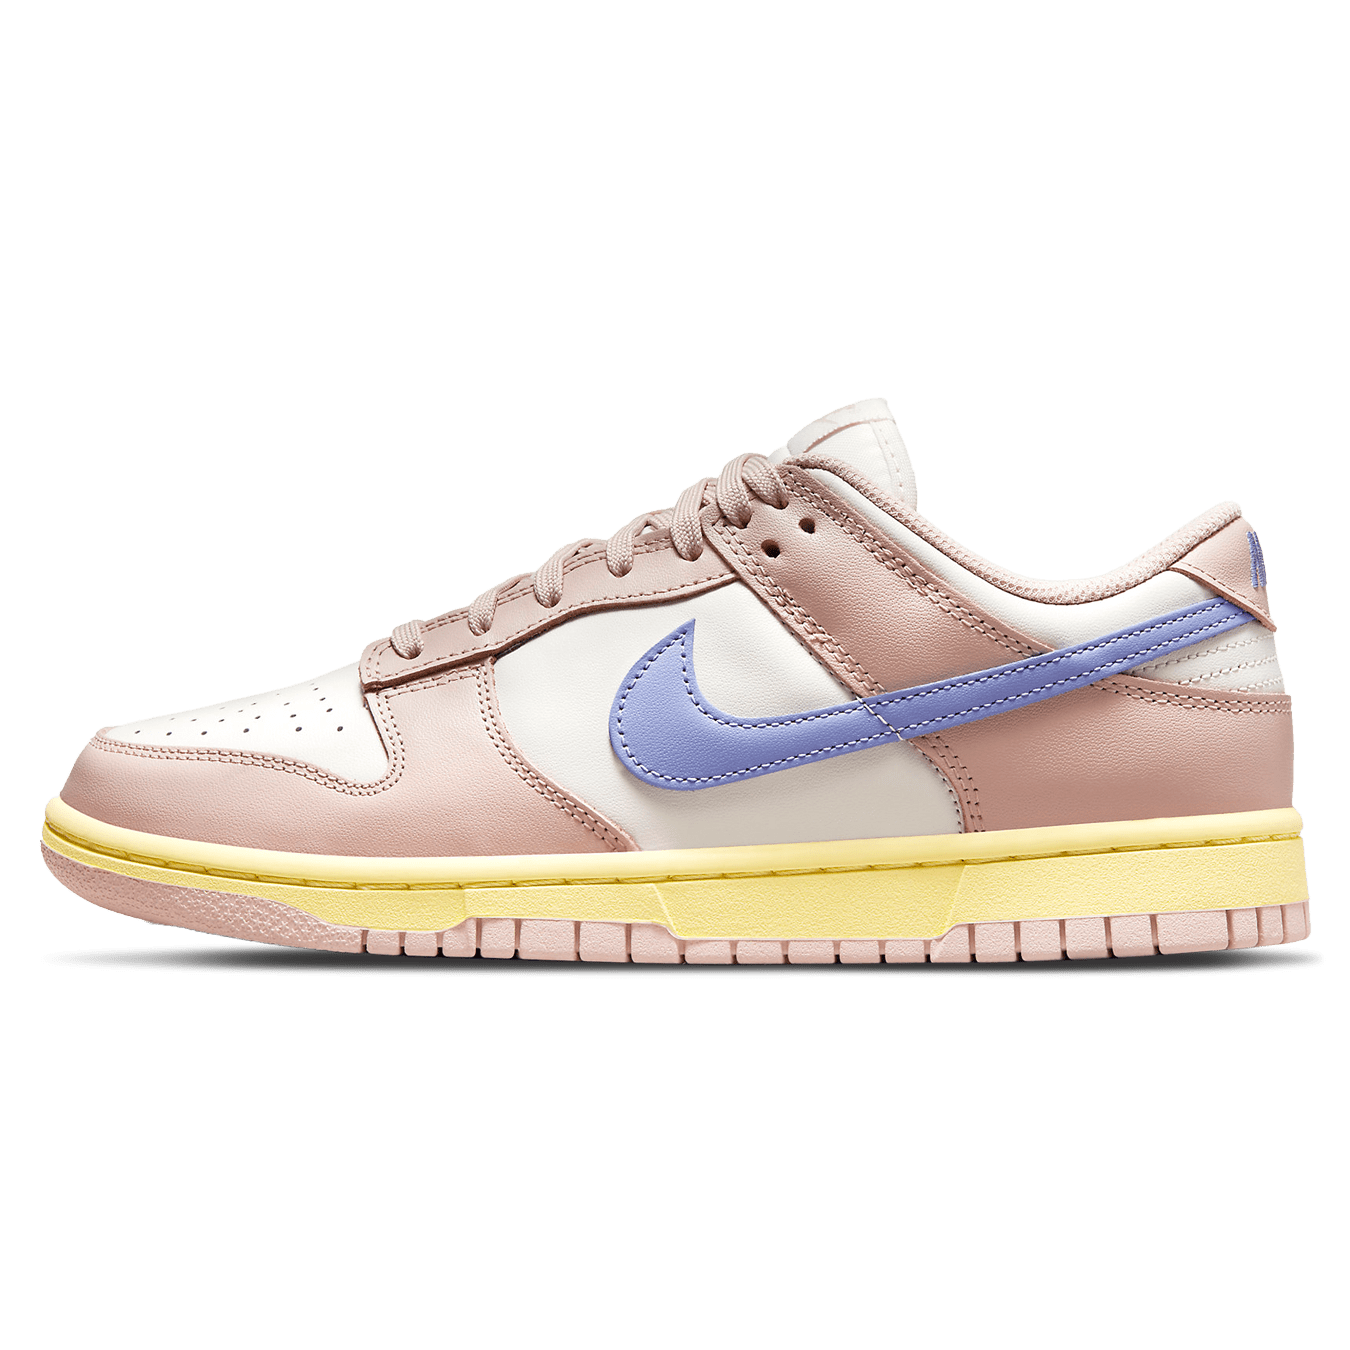 Nike Dunk Low Wmns Pink Oxford DD1503 601